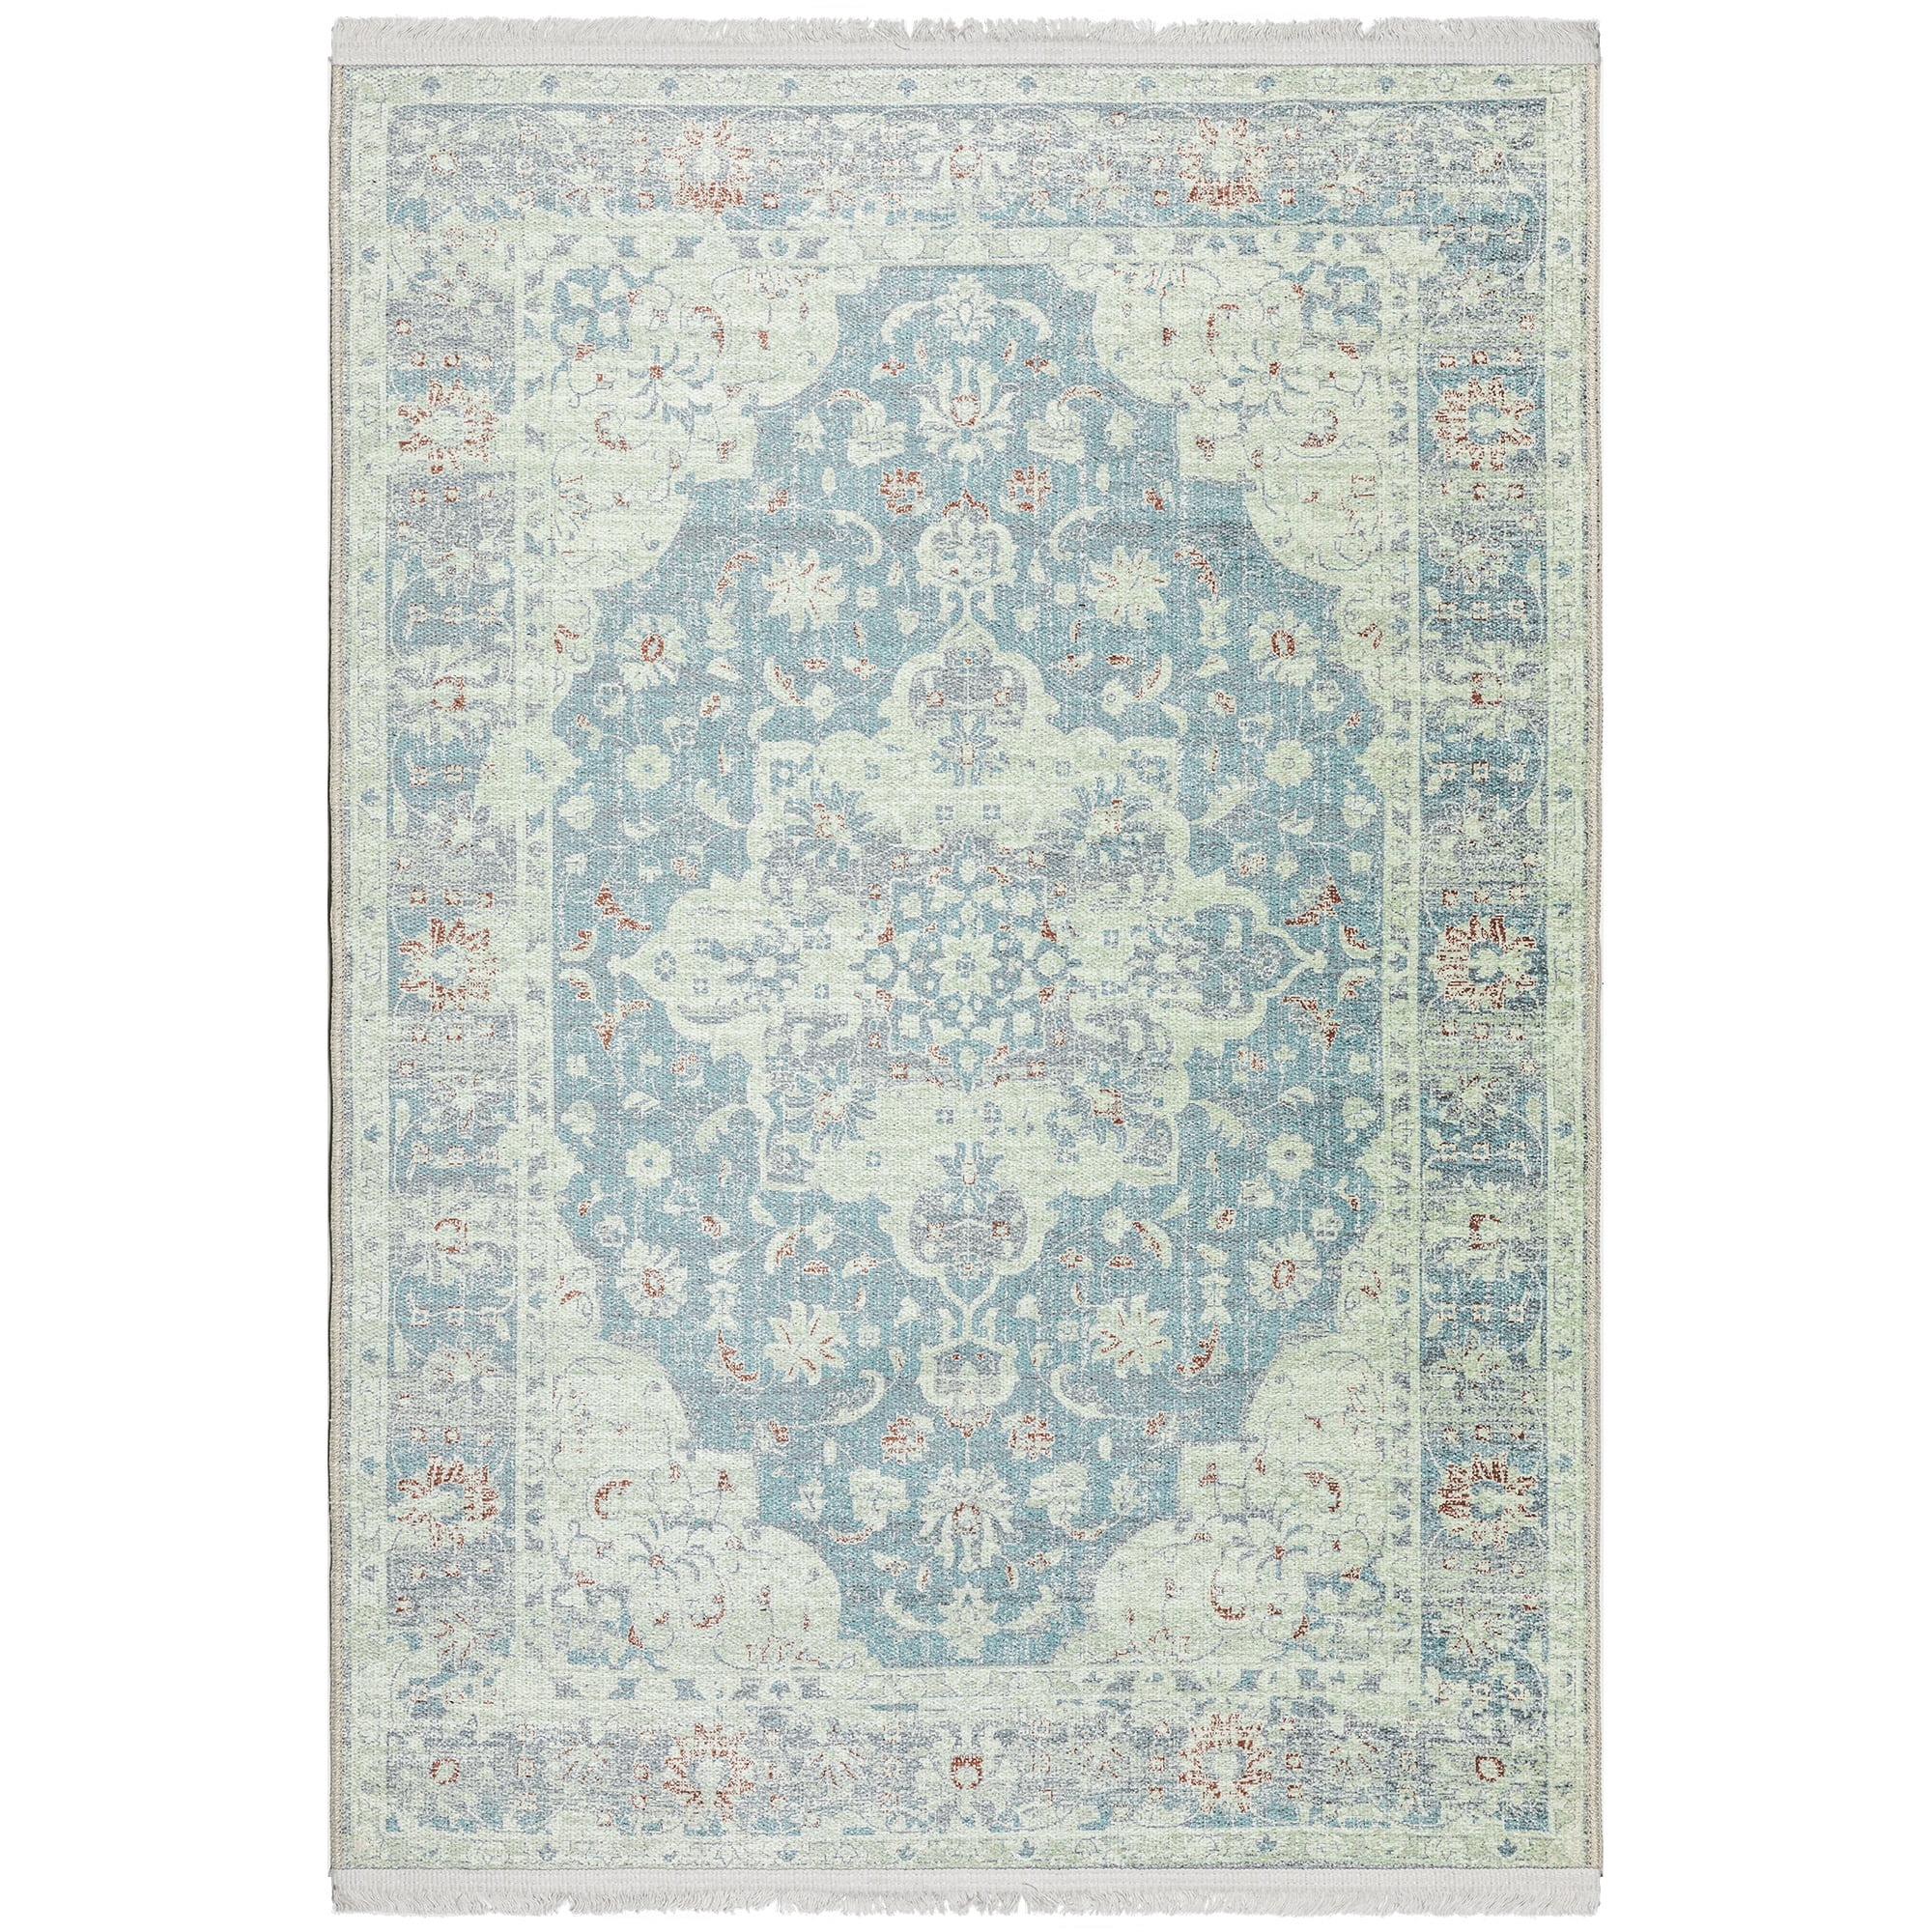 Ottomanson Non Shedding Washable Wrinkle-free Cotton Flatweave Solid 4x6  Indoor Area Rug, 4 ft. x 6 ft., Navy MIL7366-4X6 - The Home Depot